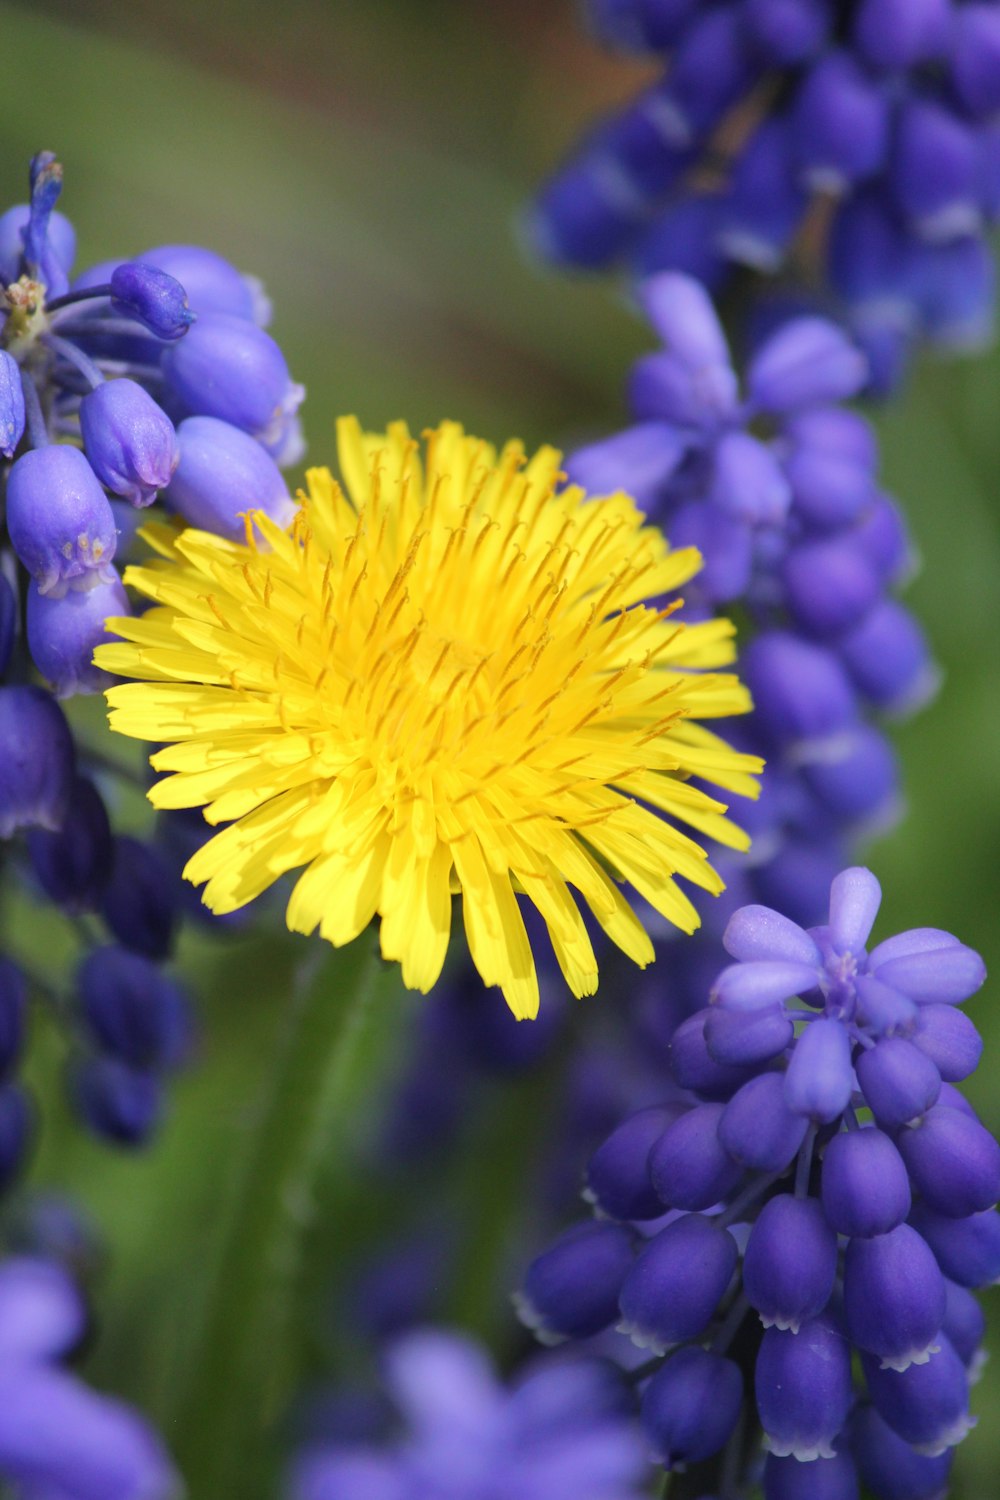 a close up of a yellow flower surrounded by blue flowers